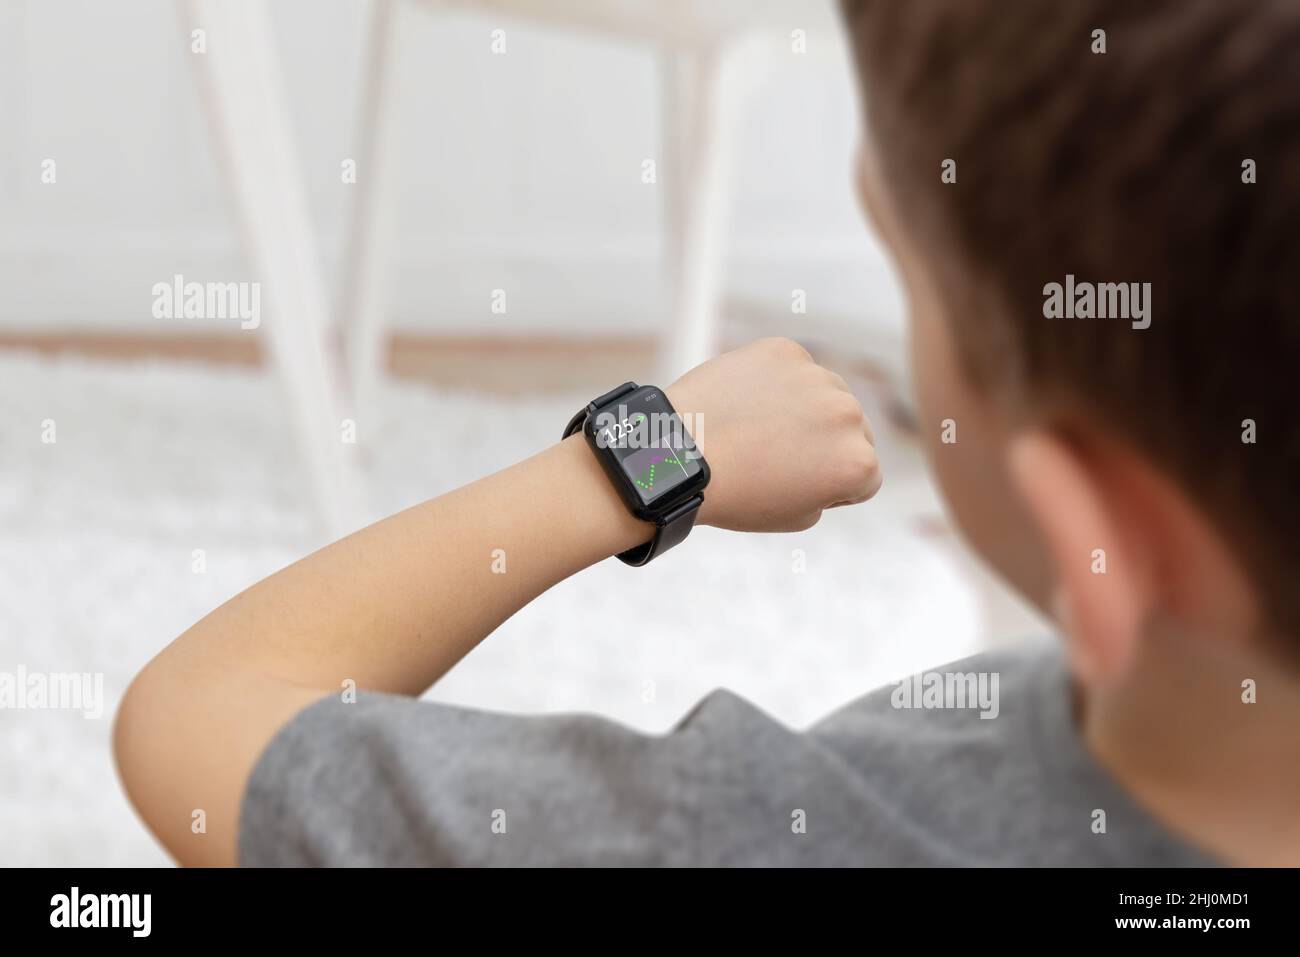 Boy monitoring diabetes from watch concept. App displays the level of glucose in the blood read from a sensor on hand Stock Photo